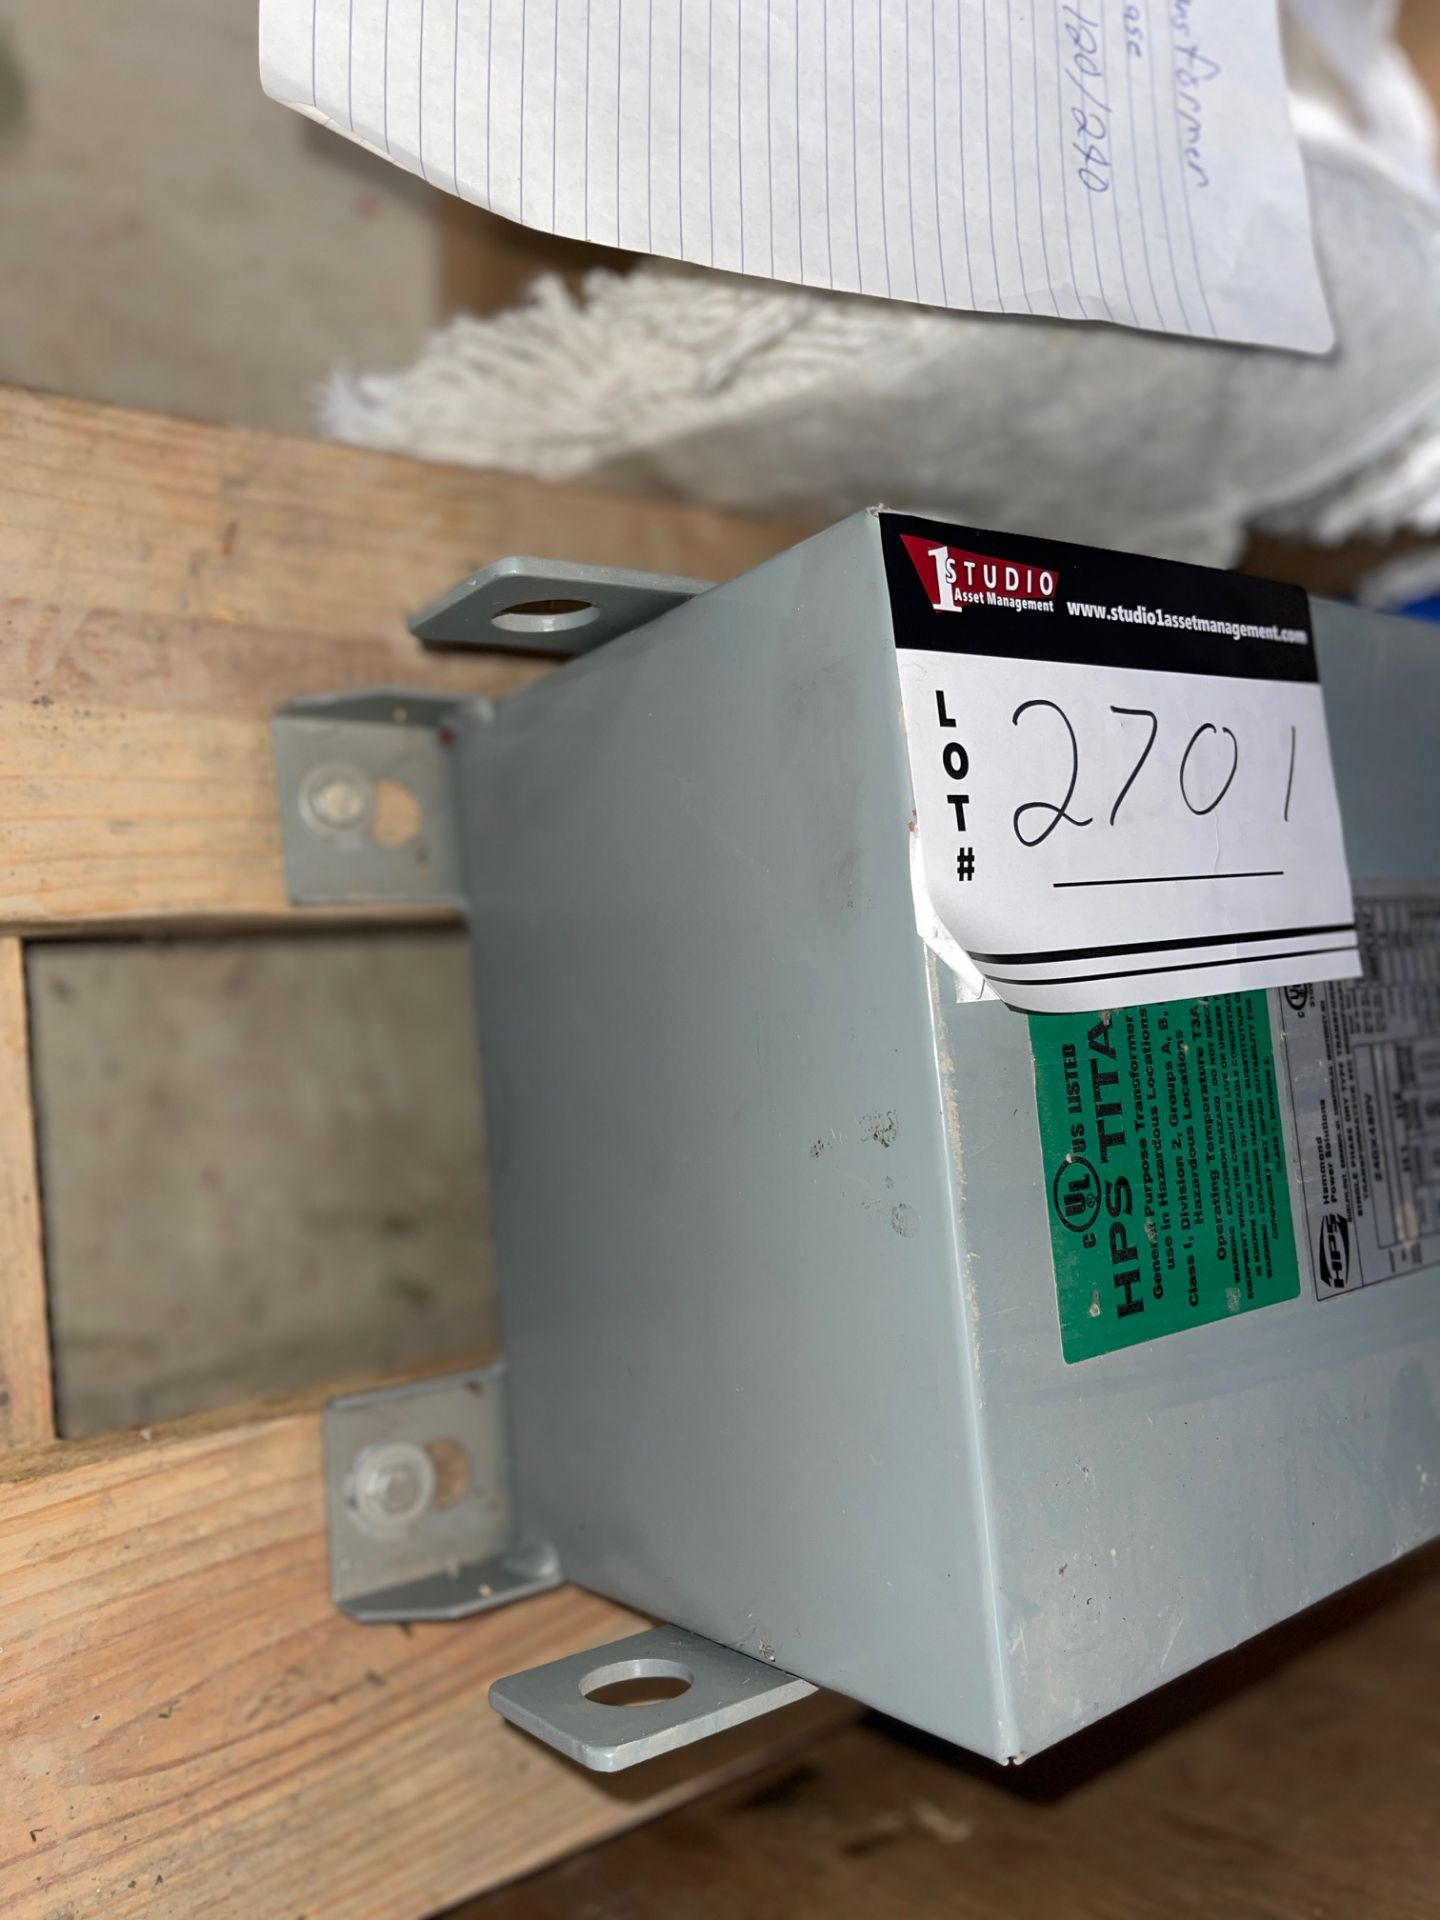 HAMMOND TRANSFORMER SINGLE PHASE, 240/480 TO 120/240, 7.5 KVA, WEIGHS 115 POUNDS, NEW - Image 2 of 3